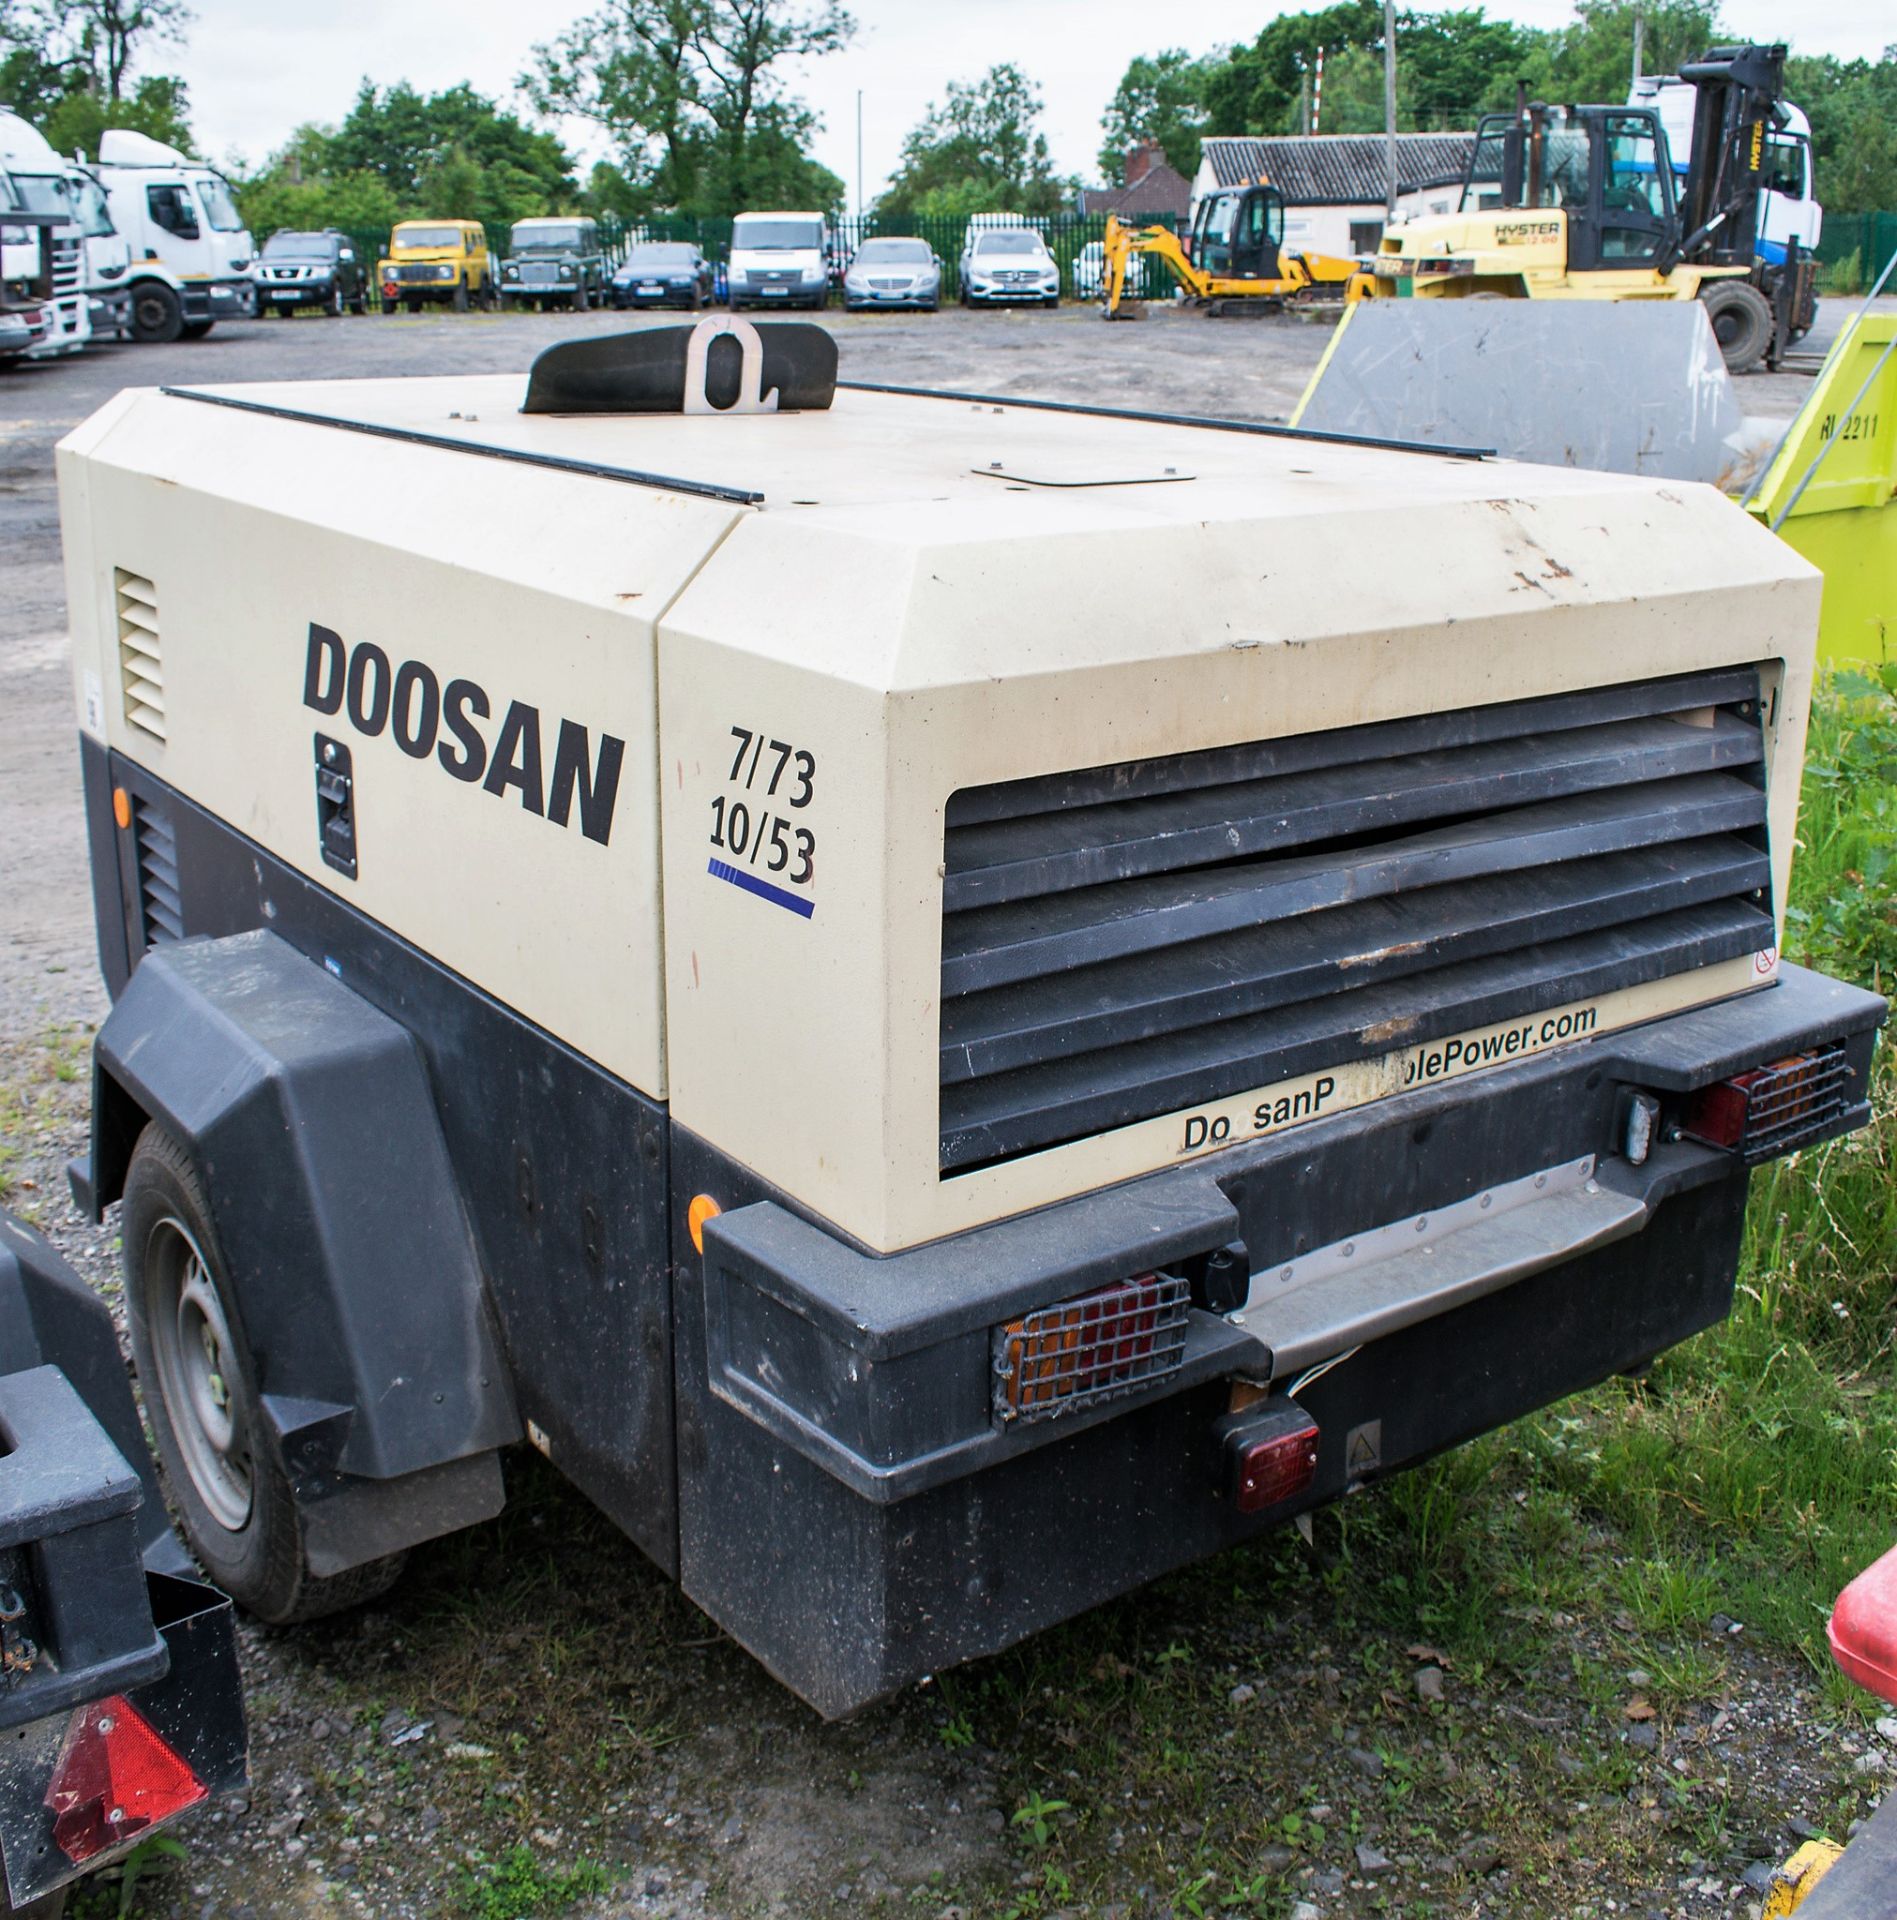 Doosan 7/73 diesel driven mobile air compressor Year: 2015 S/N: FY542581 Recorded Hours: 1585 - Image 2 of 3